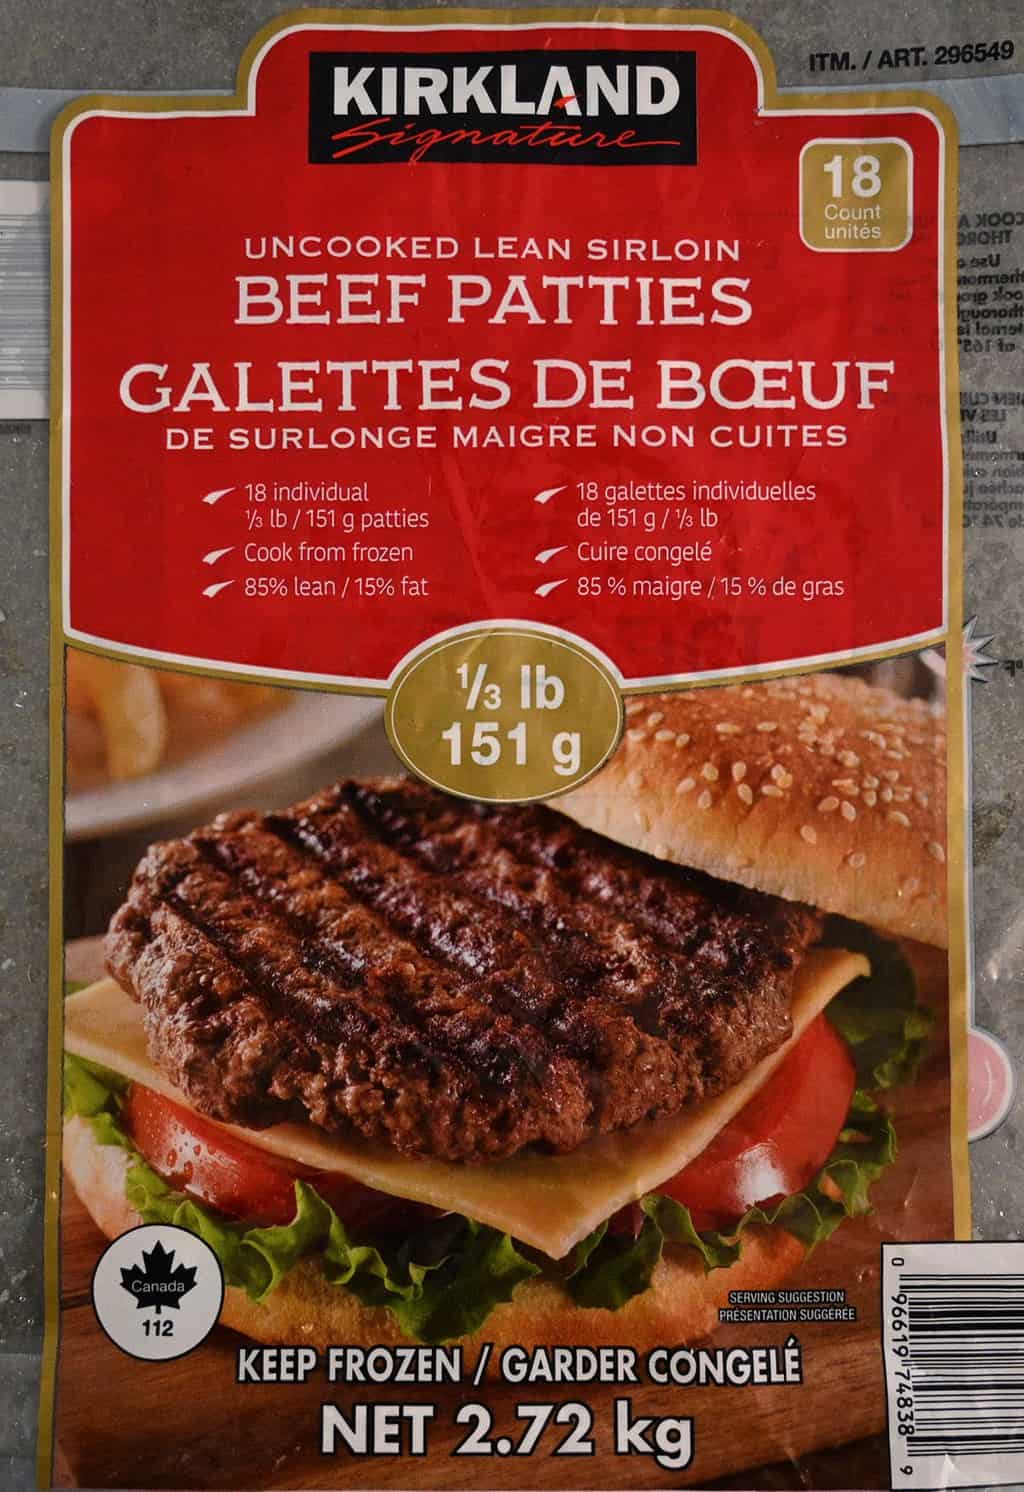 Closeup image of the front of the bag of the Costco Kirkland Signature Uncooked Lean Sirloin Beef Patties. 